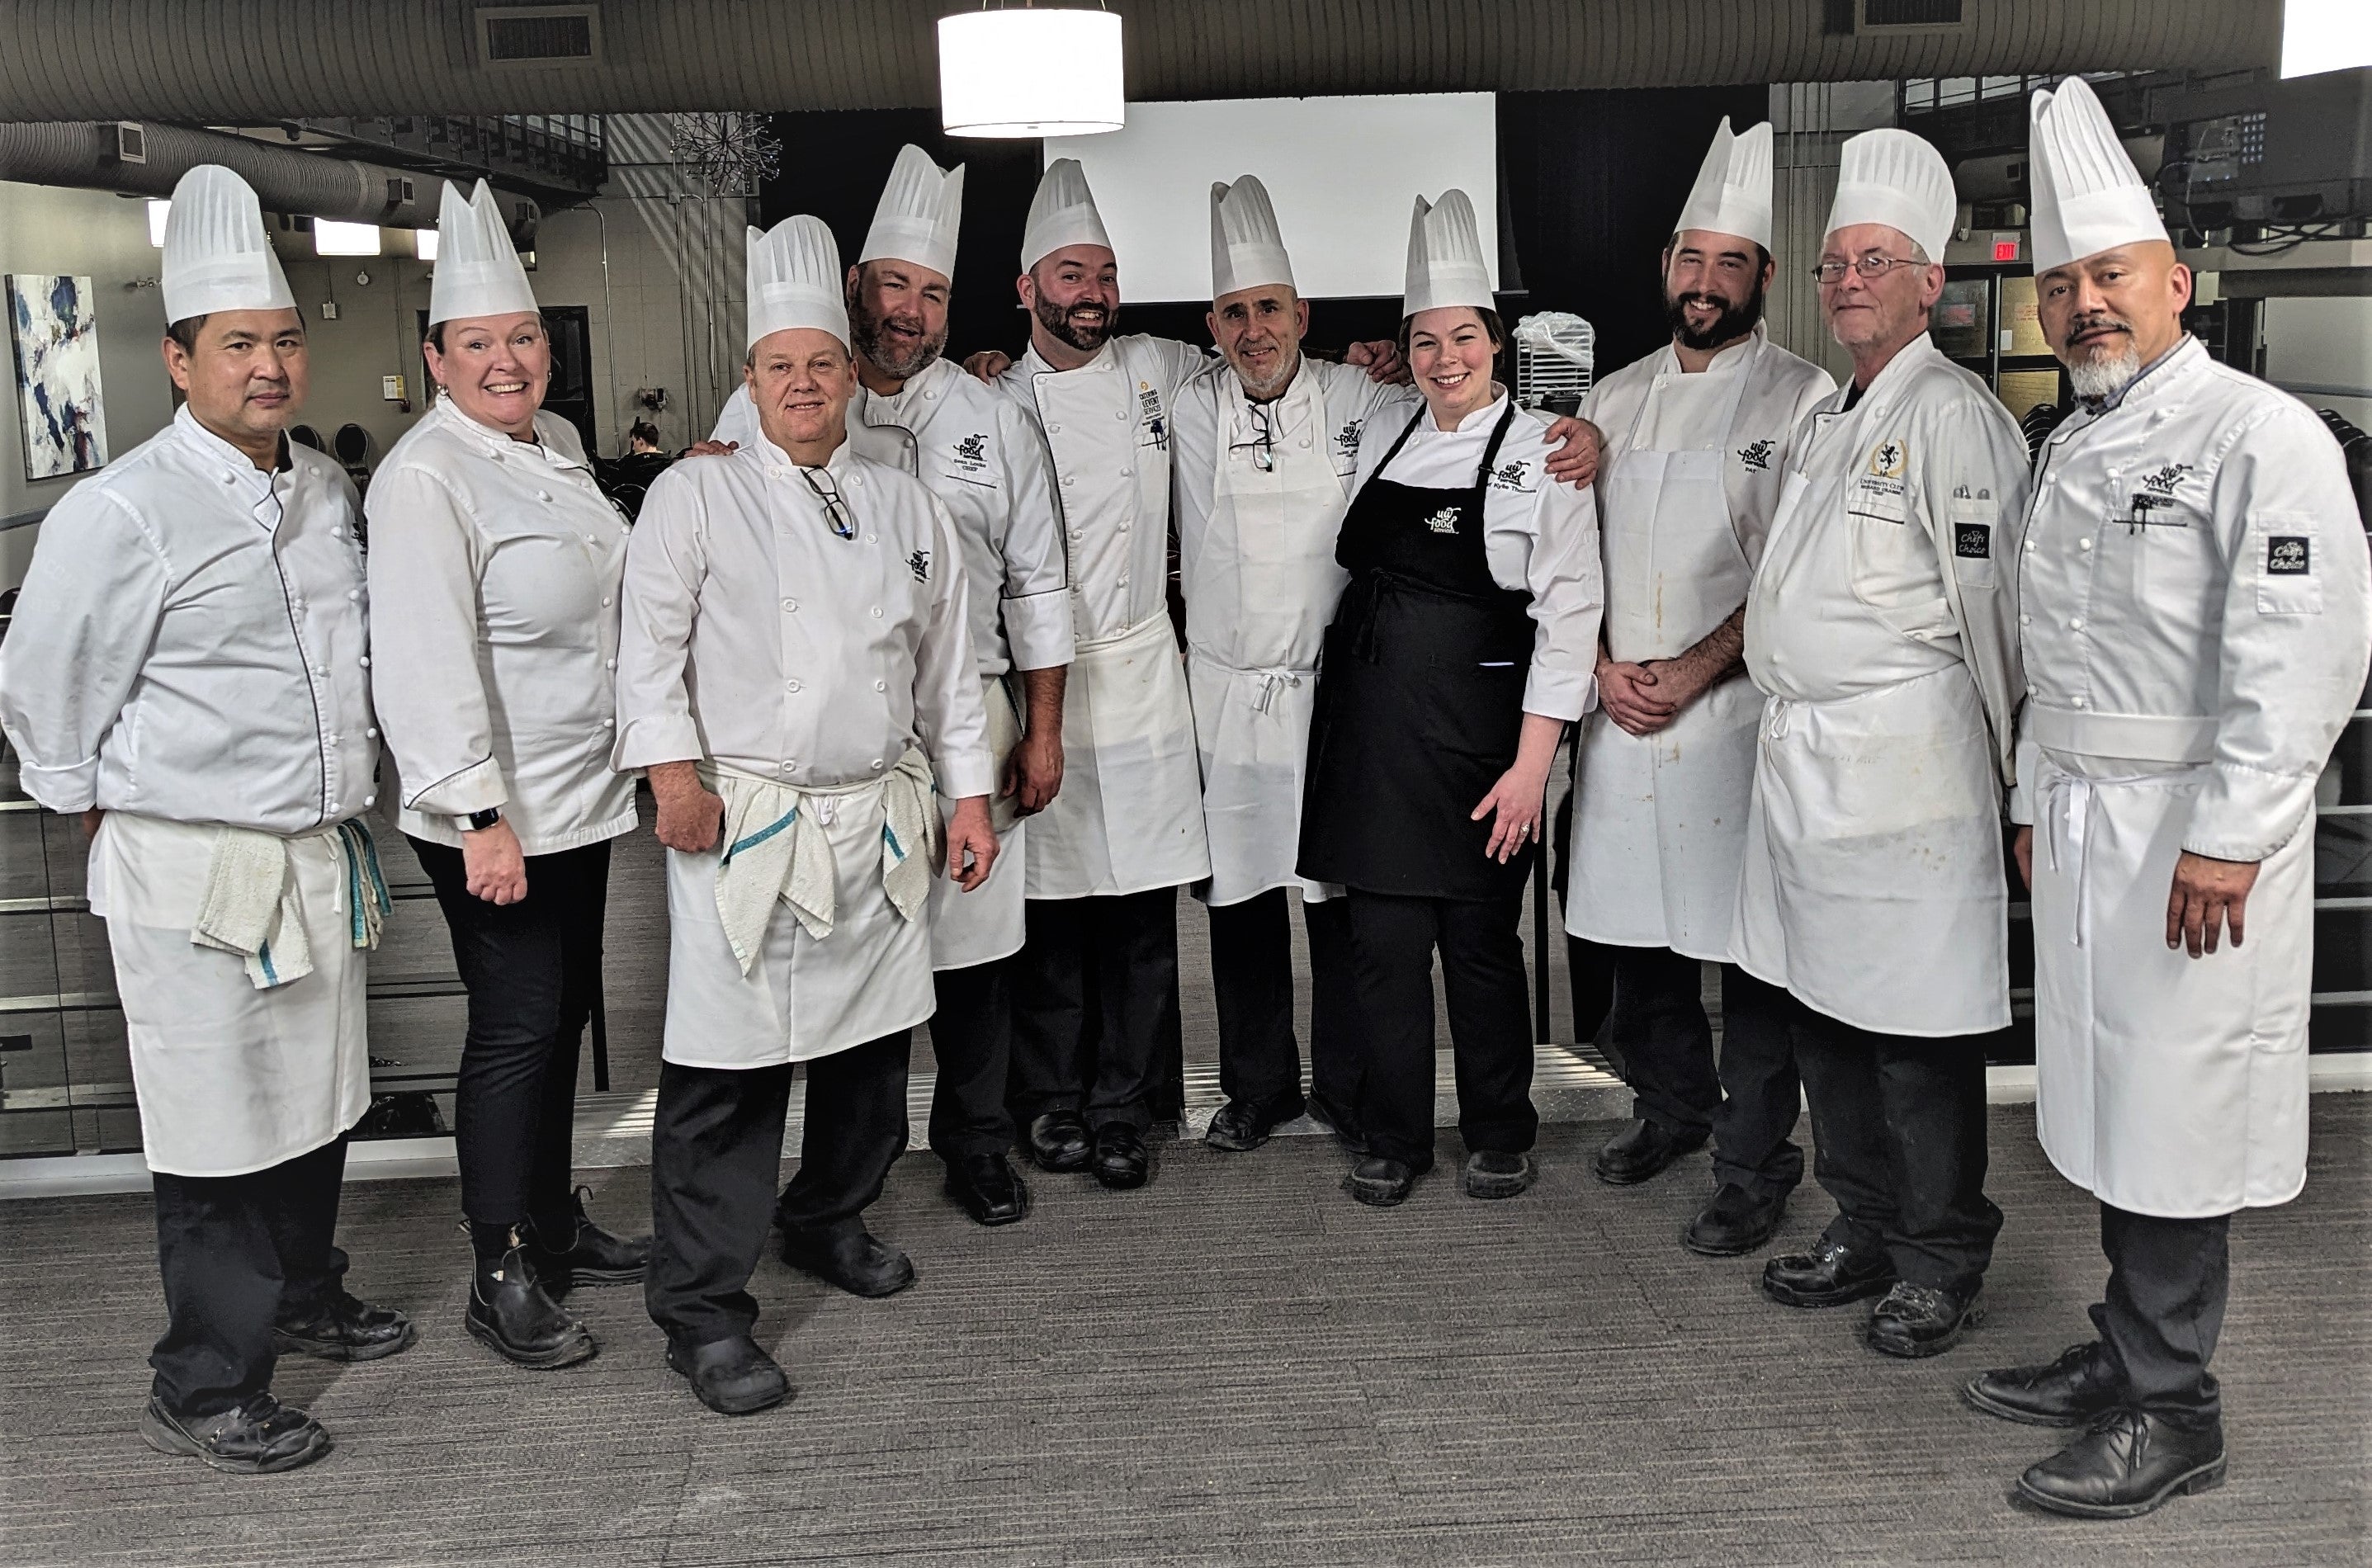 Chefs standing together